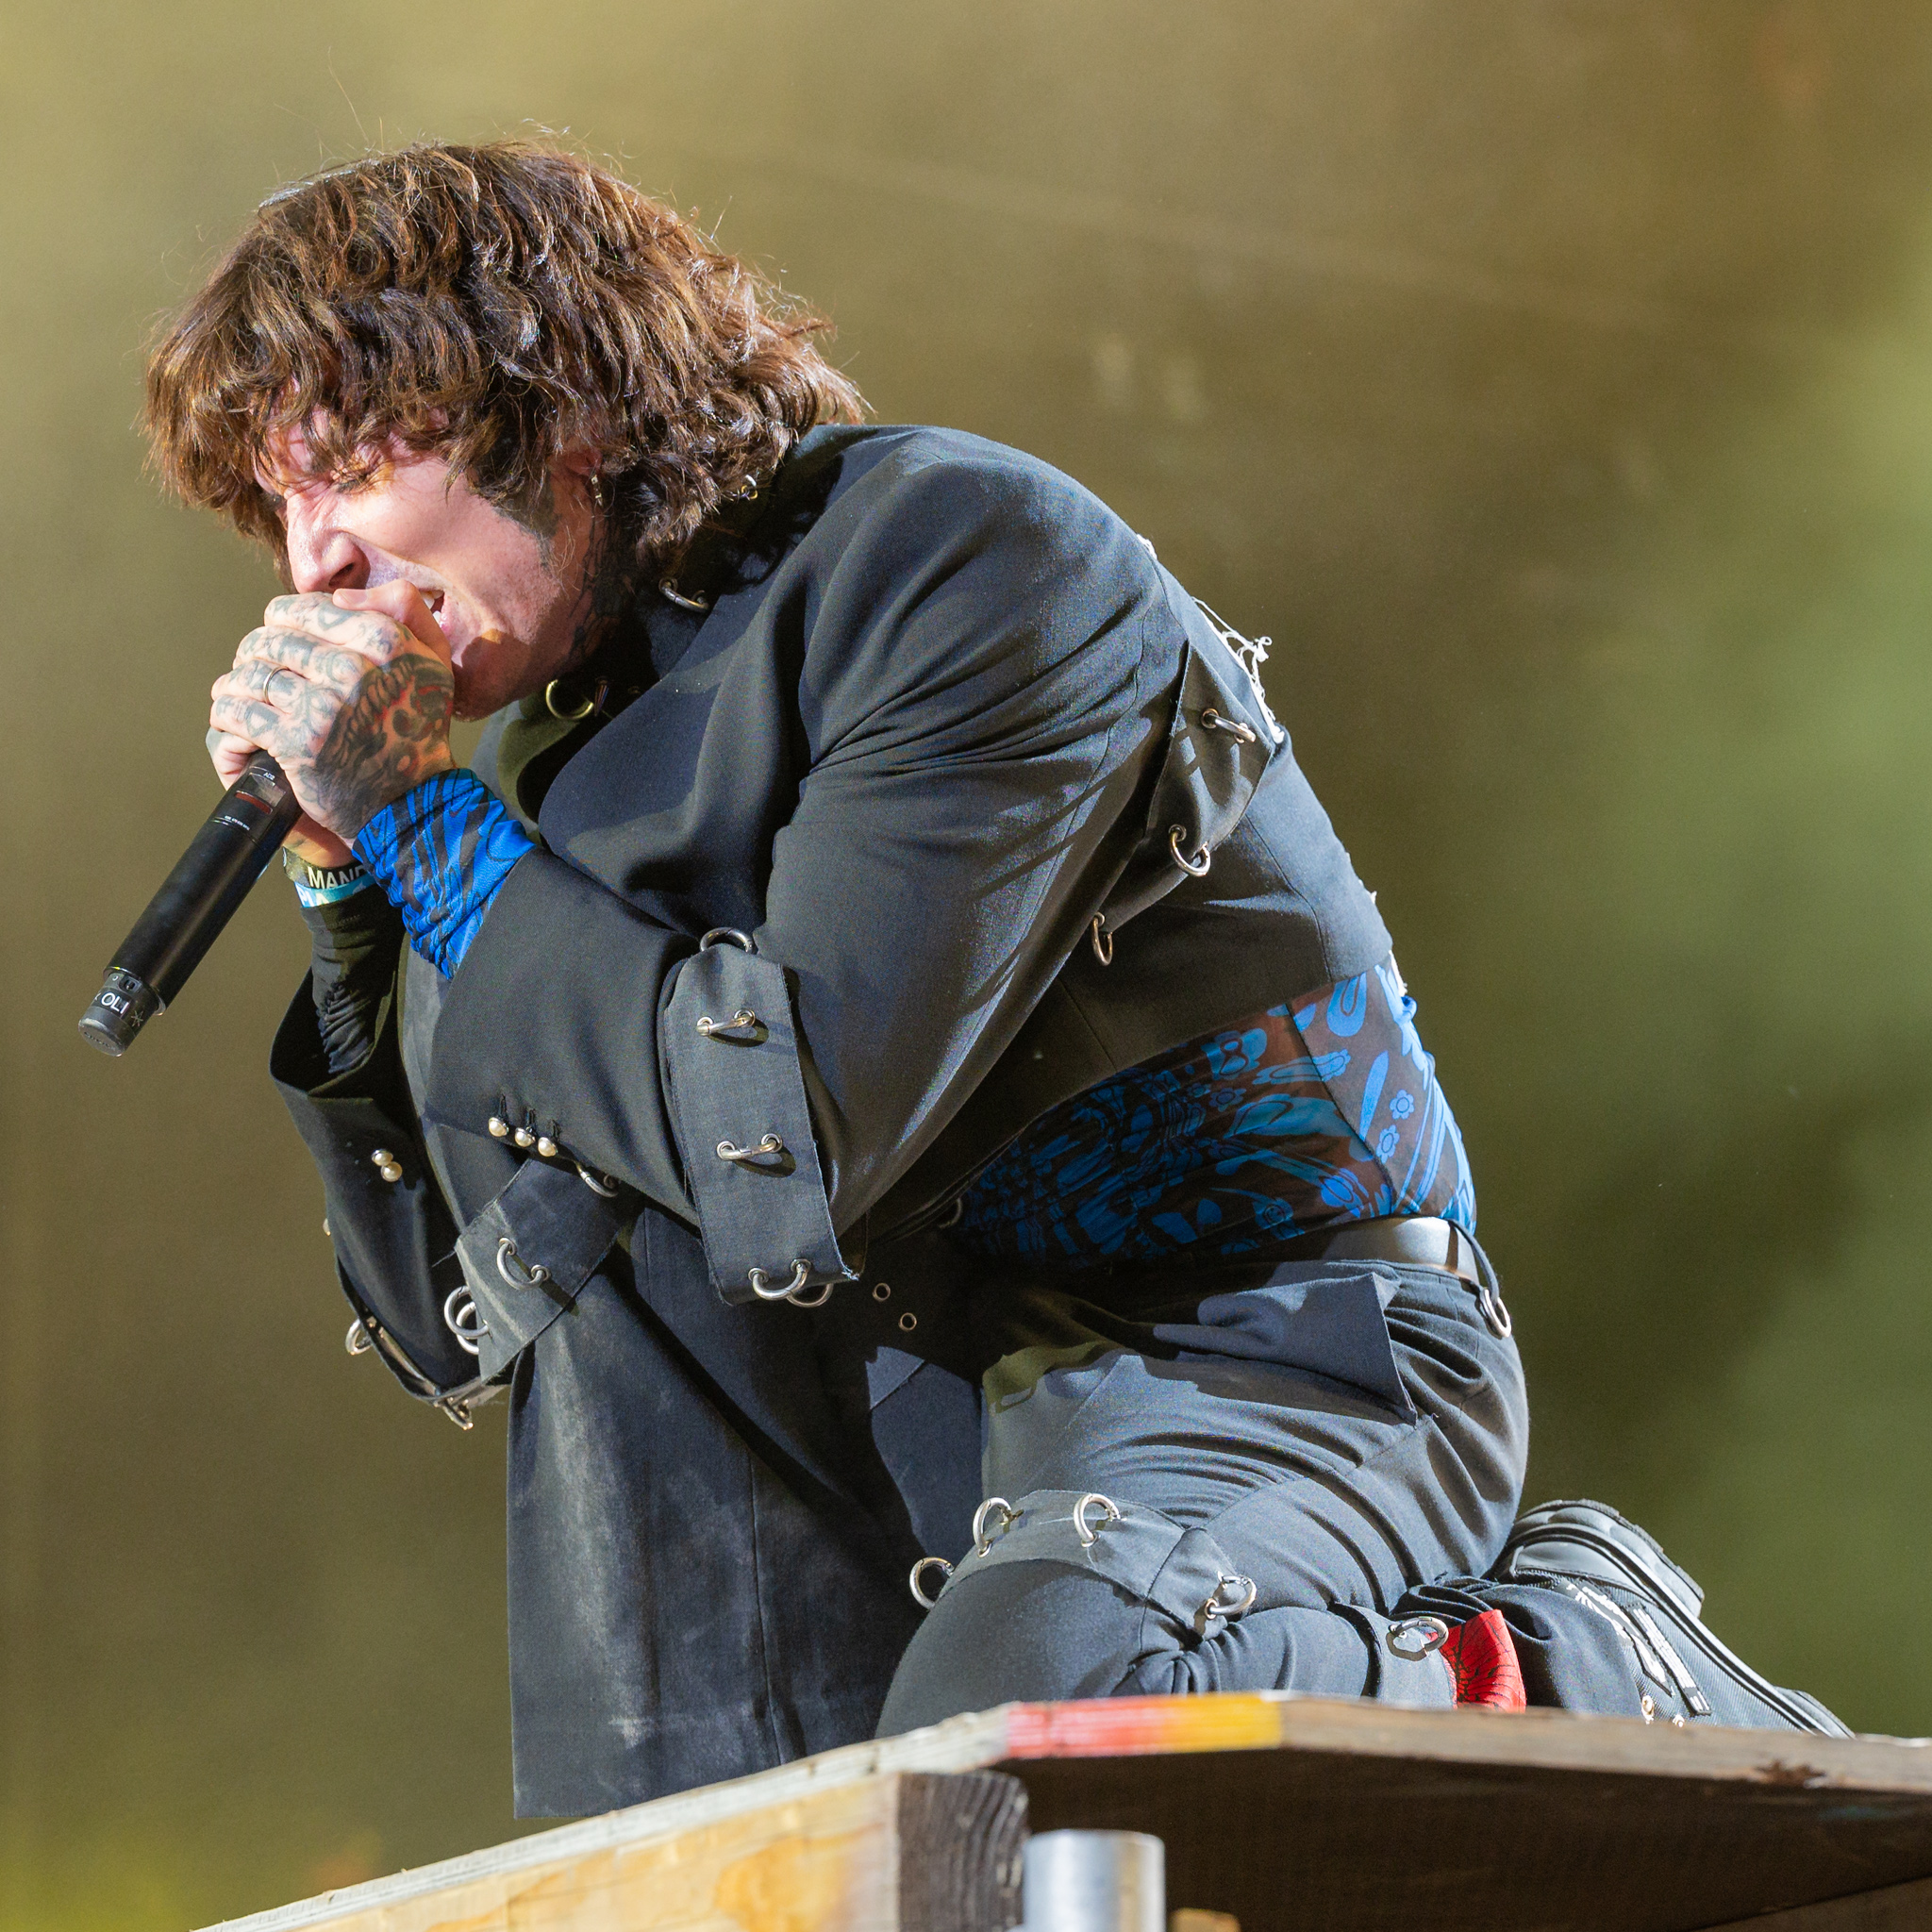 Oliver Sykes of the band Bring Me the Horizon performs in concert during  the Rock Allegiance Festival at PPL Park on Saturday, Oct. 10, 2015, in  Chester, Pa. (Photo by Owen Sweeney/Invision/AP